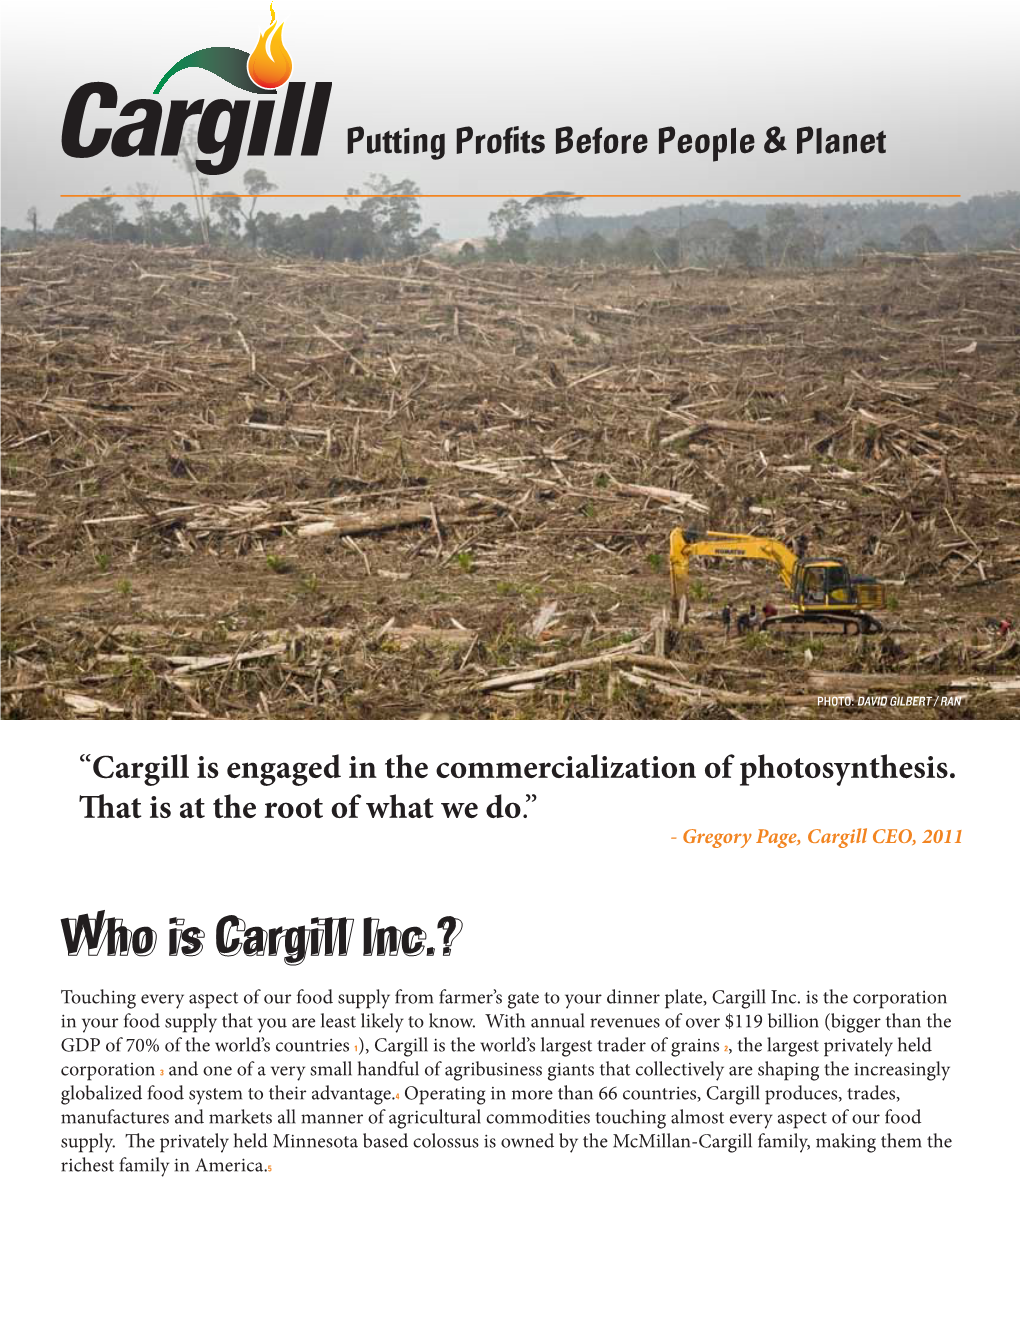 Who Is Cargill Inc.?